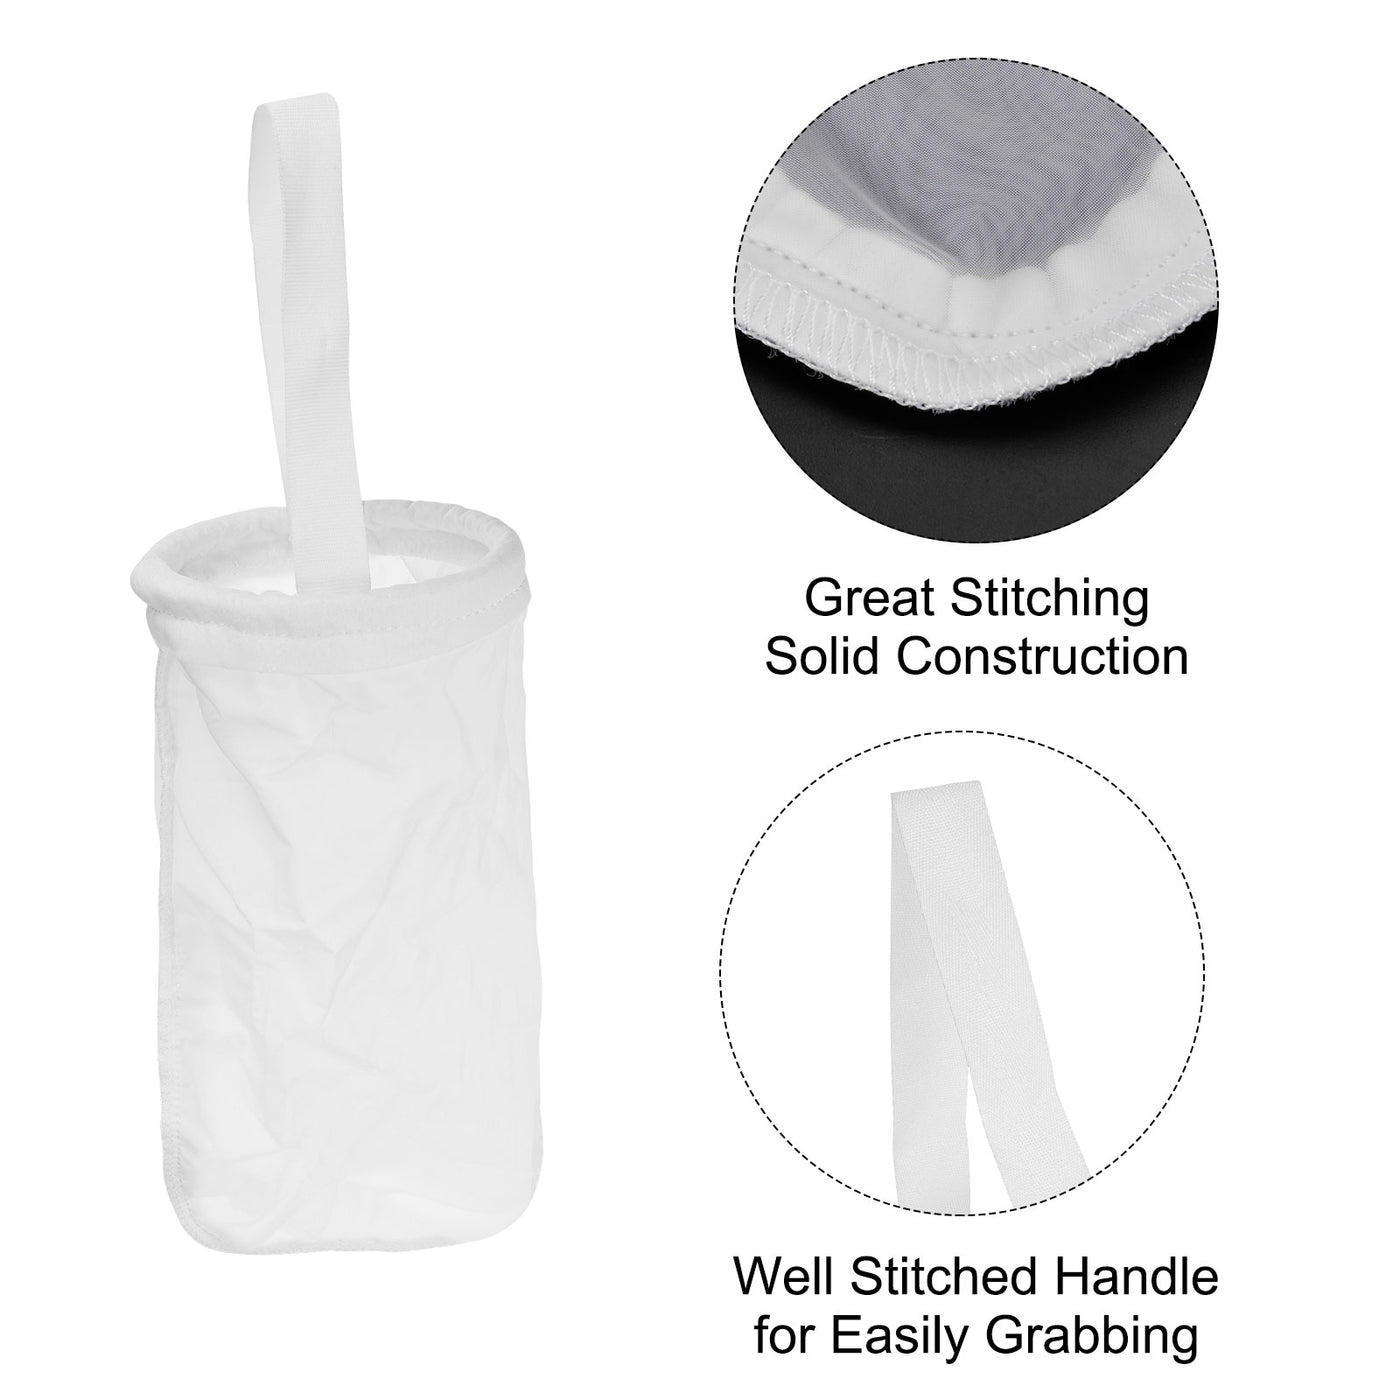 uxcell Uxcell Paint Filter Bag 500 Mesh (9.1"x4.1") Nylon Strainer for Filtering Paint